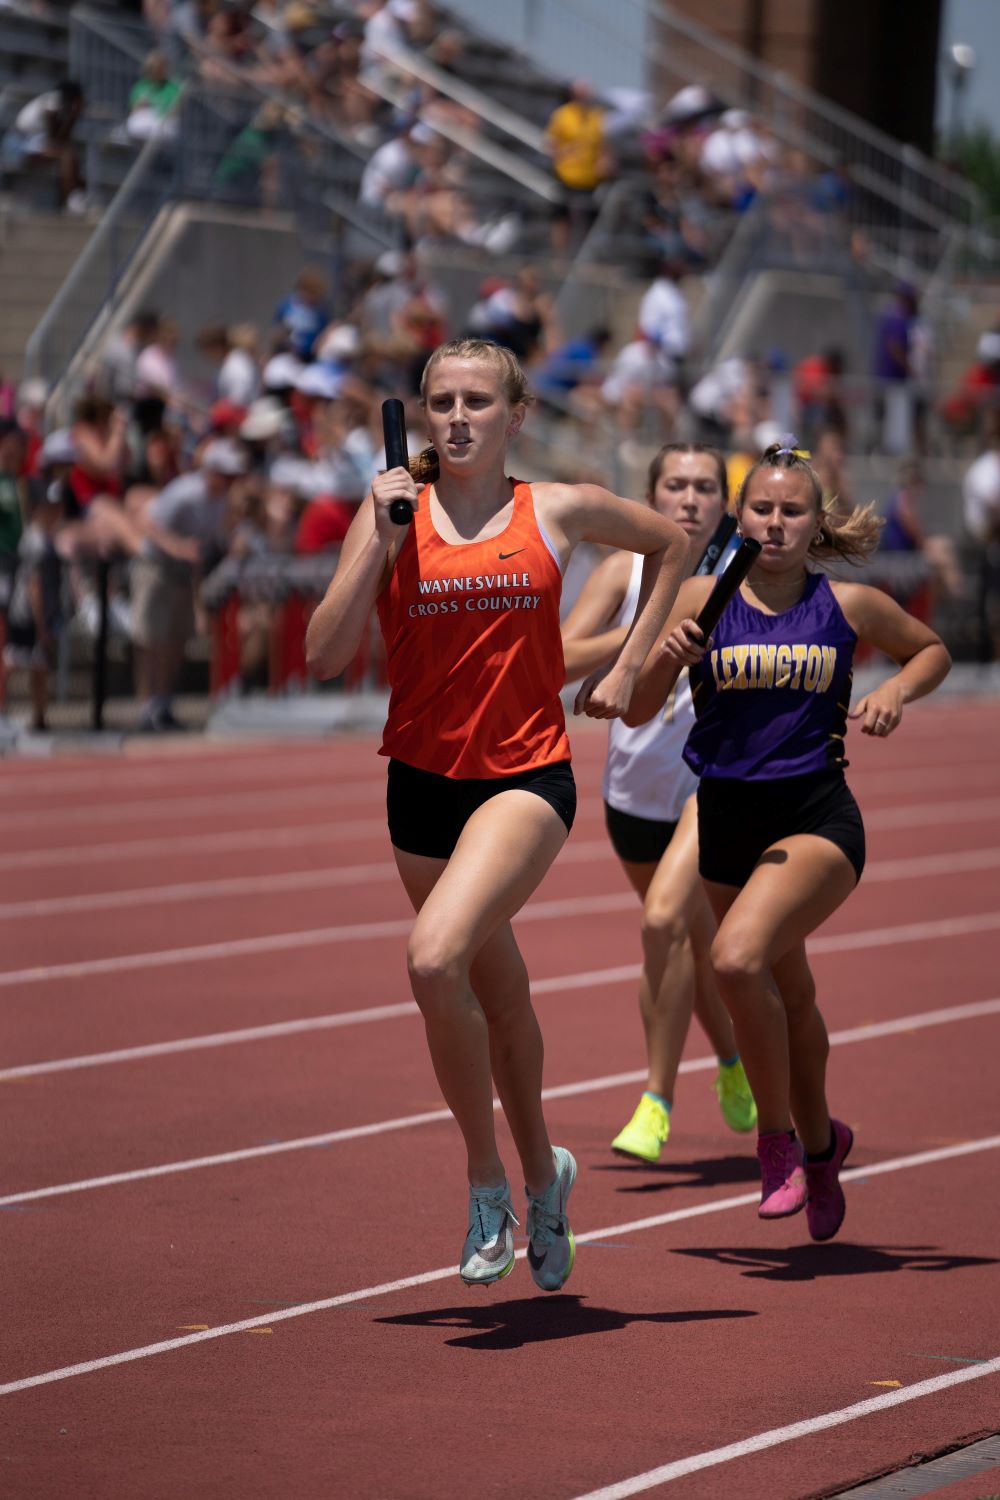 Waynesville Girls Win 4 x 800 Relay at State Division 2 Meet